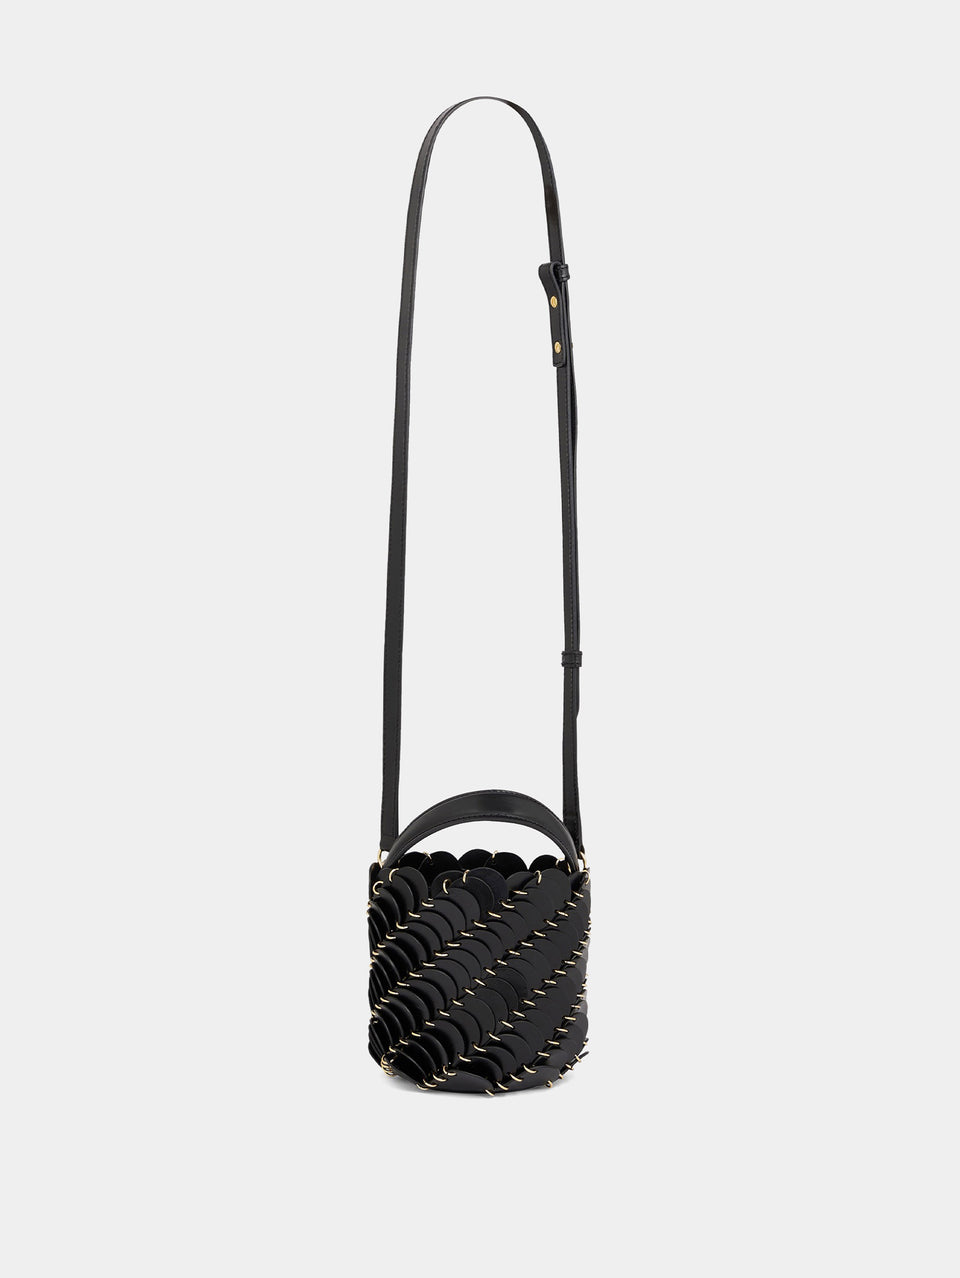 Small Black bucket Paco bag in leather